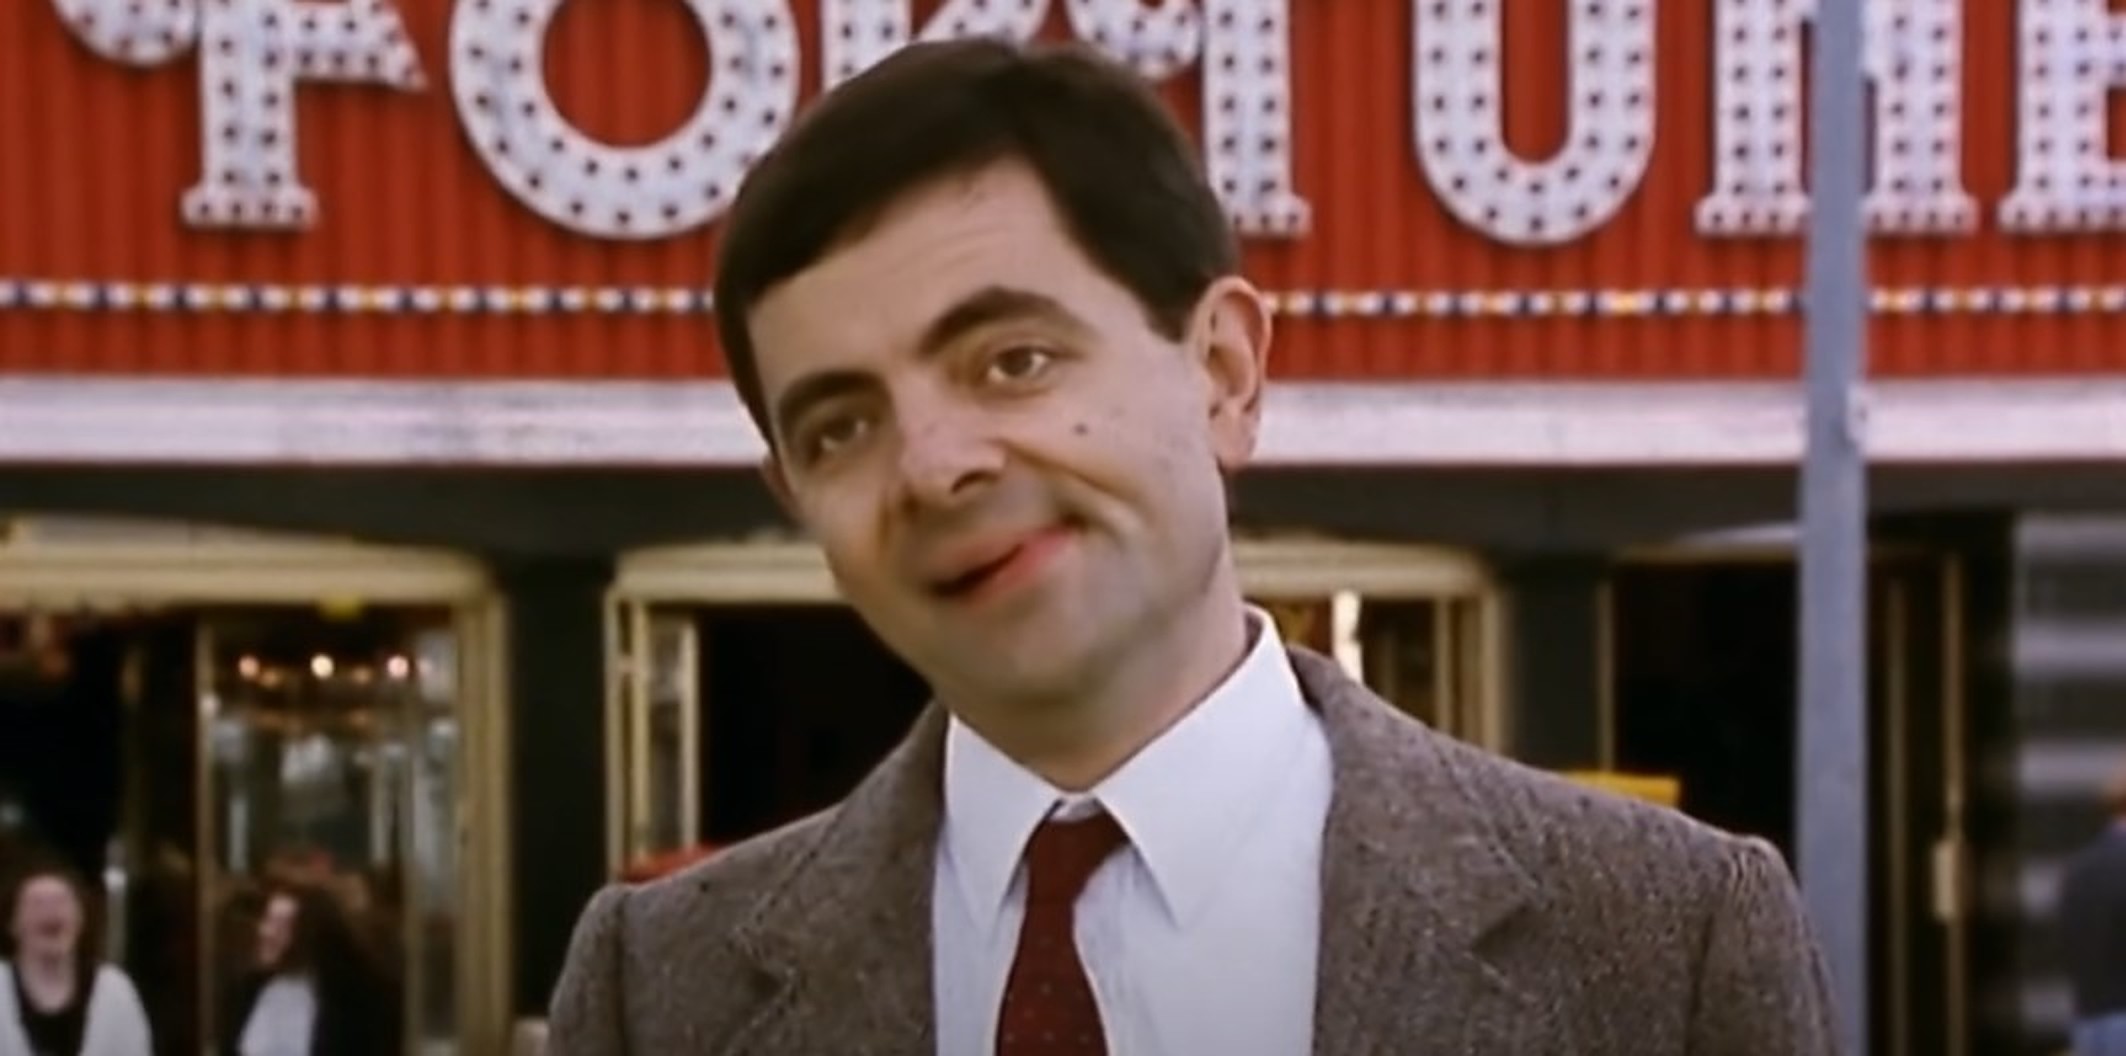 Is Mr. Bean Based on a Real Person?